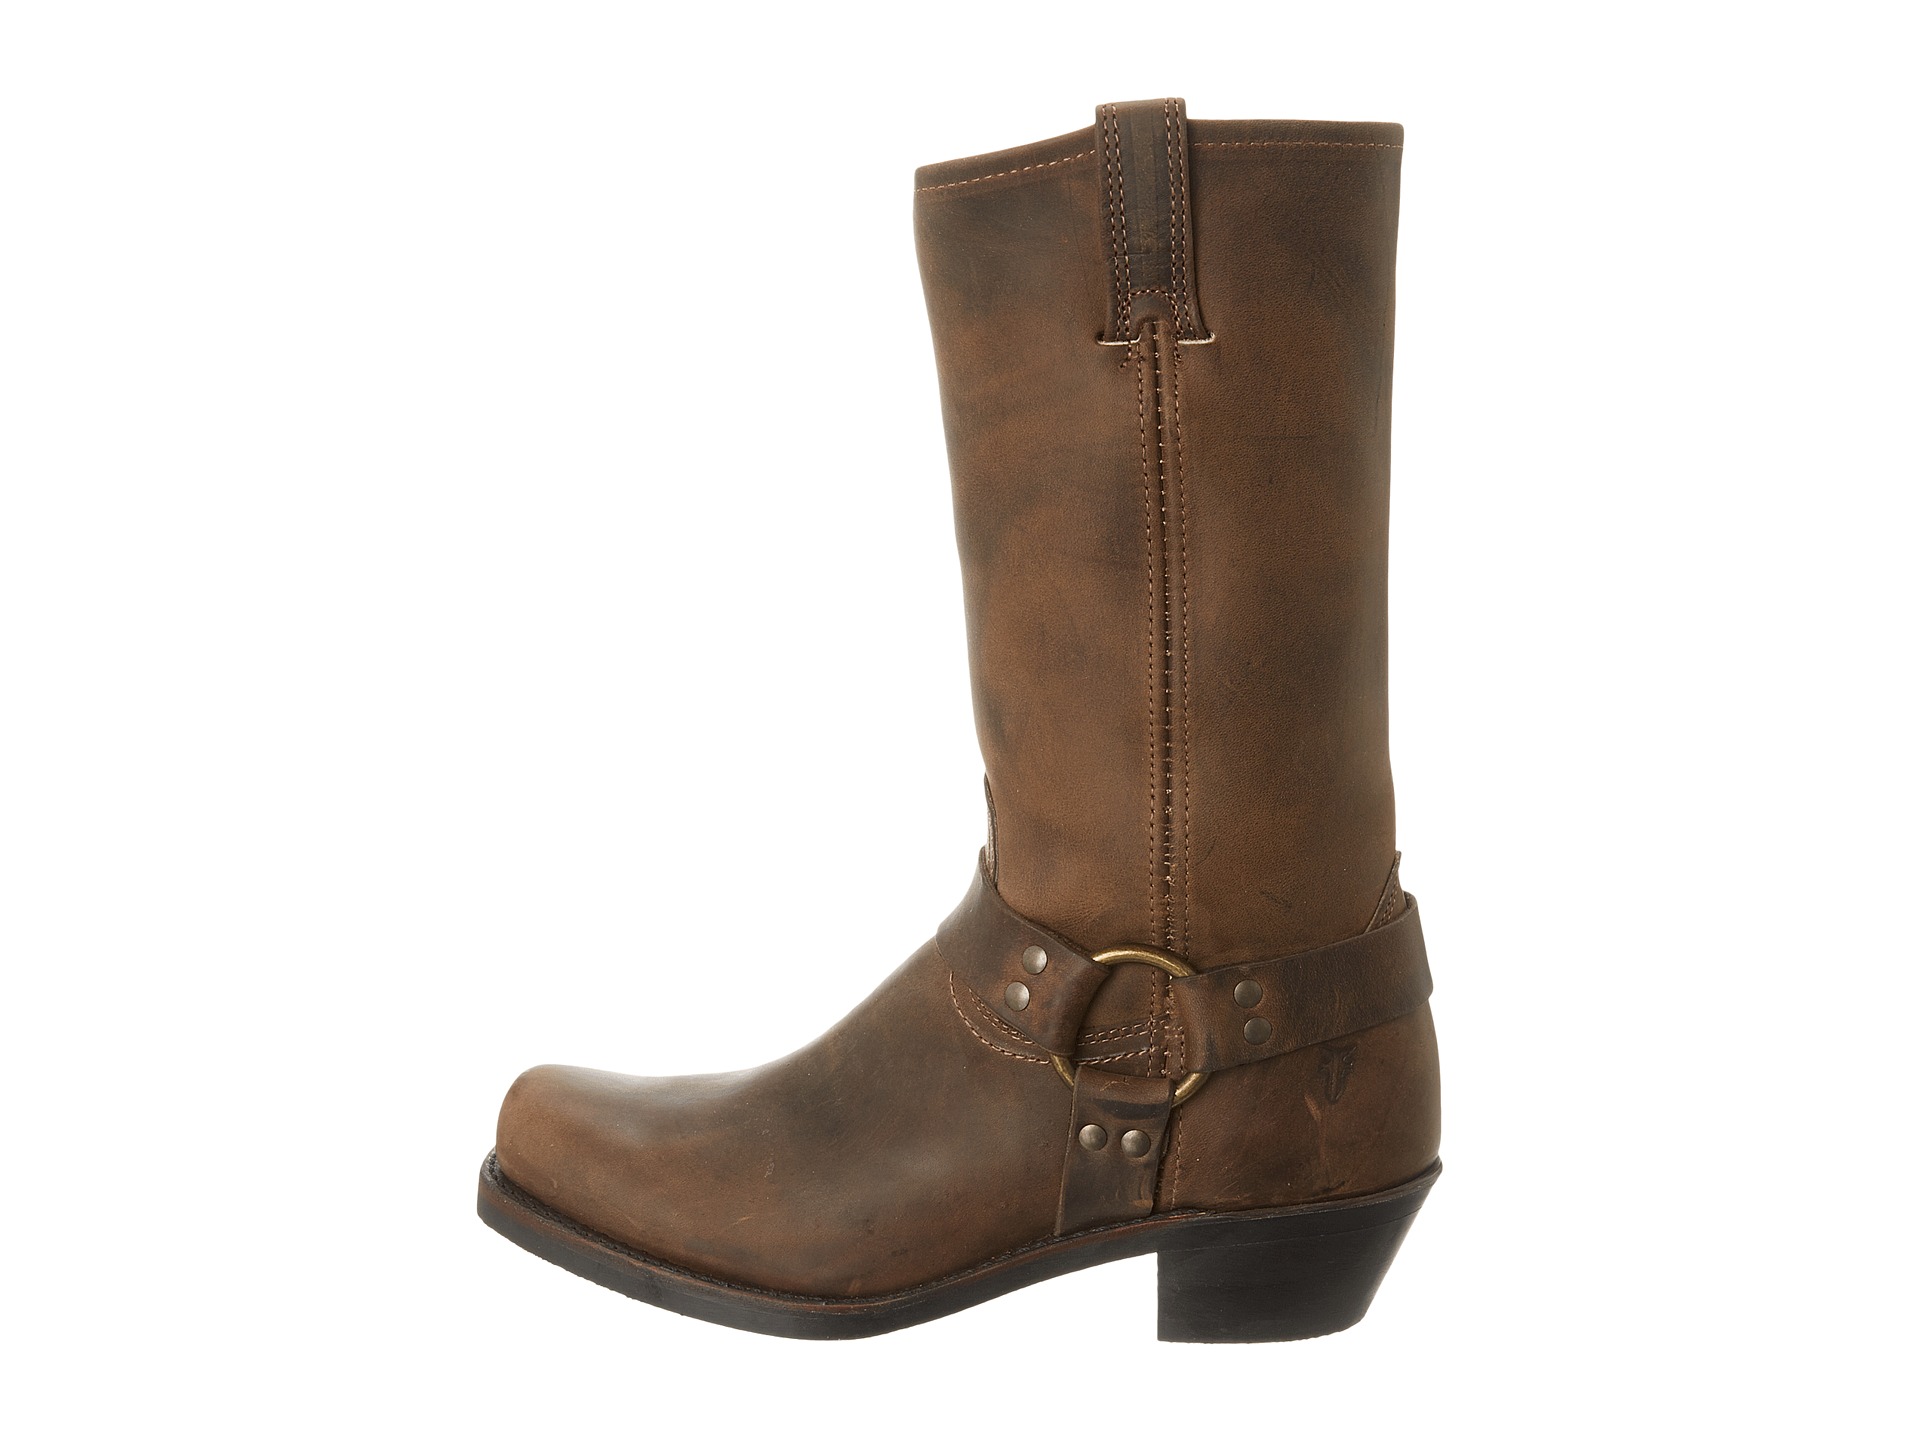 Frye Harness 12R at Zappos.com